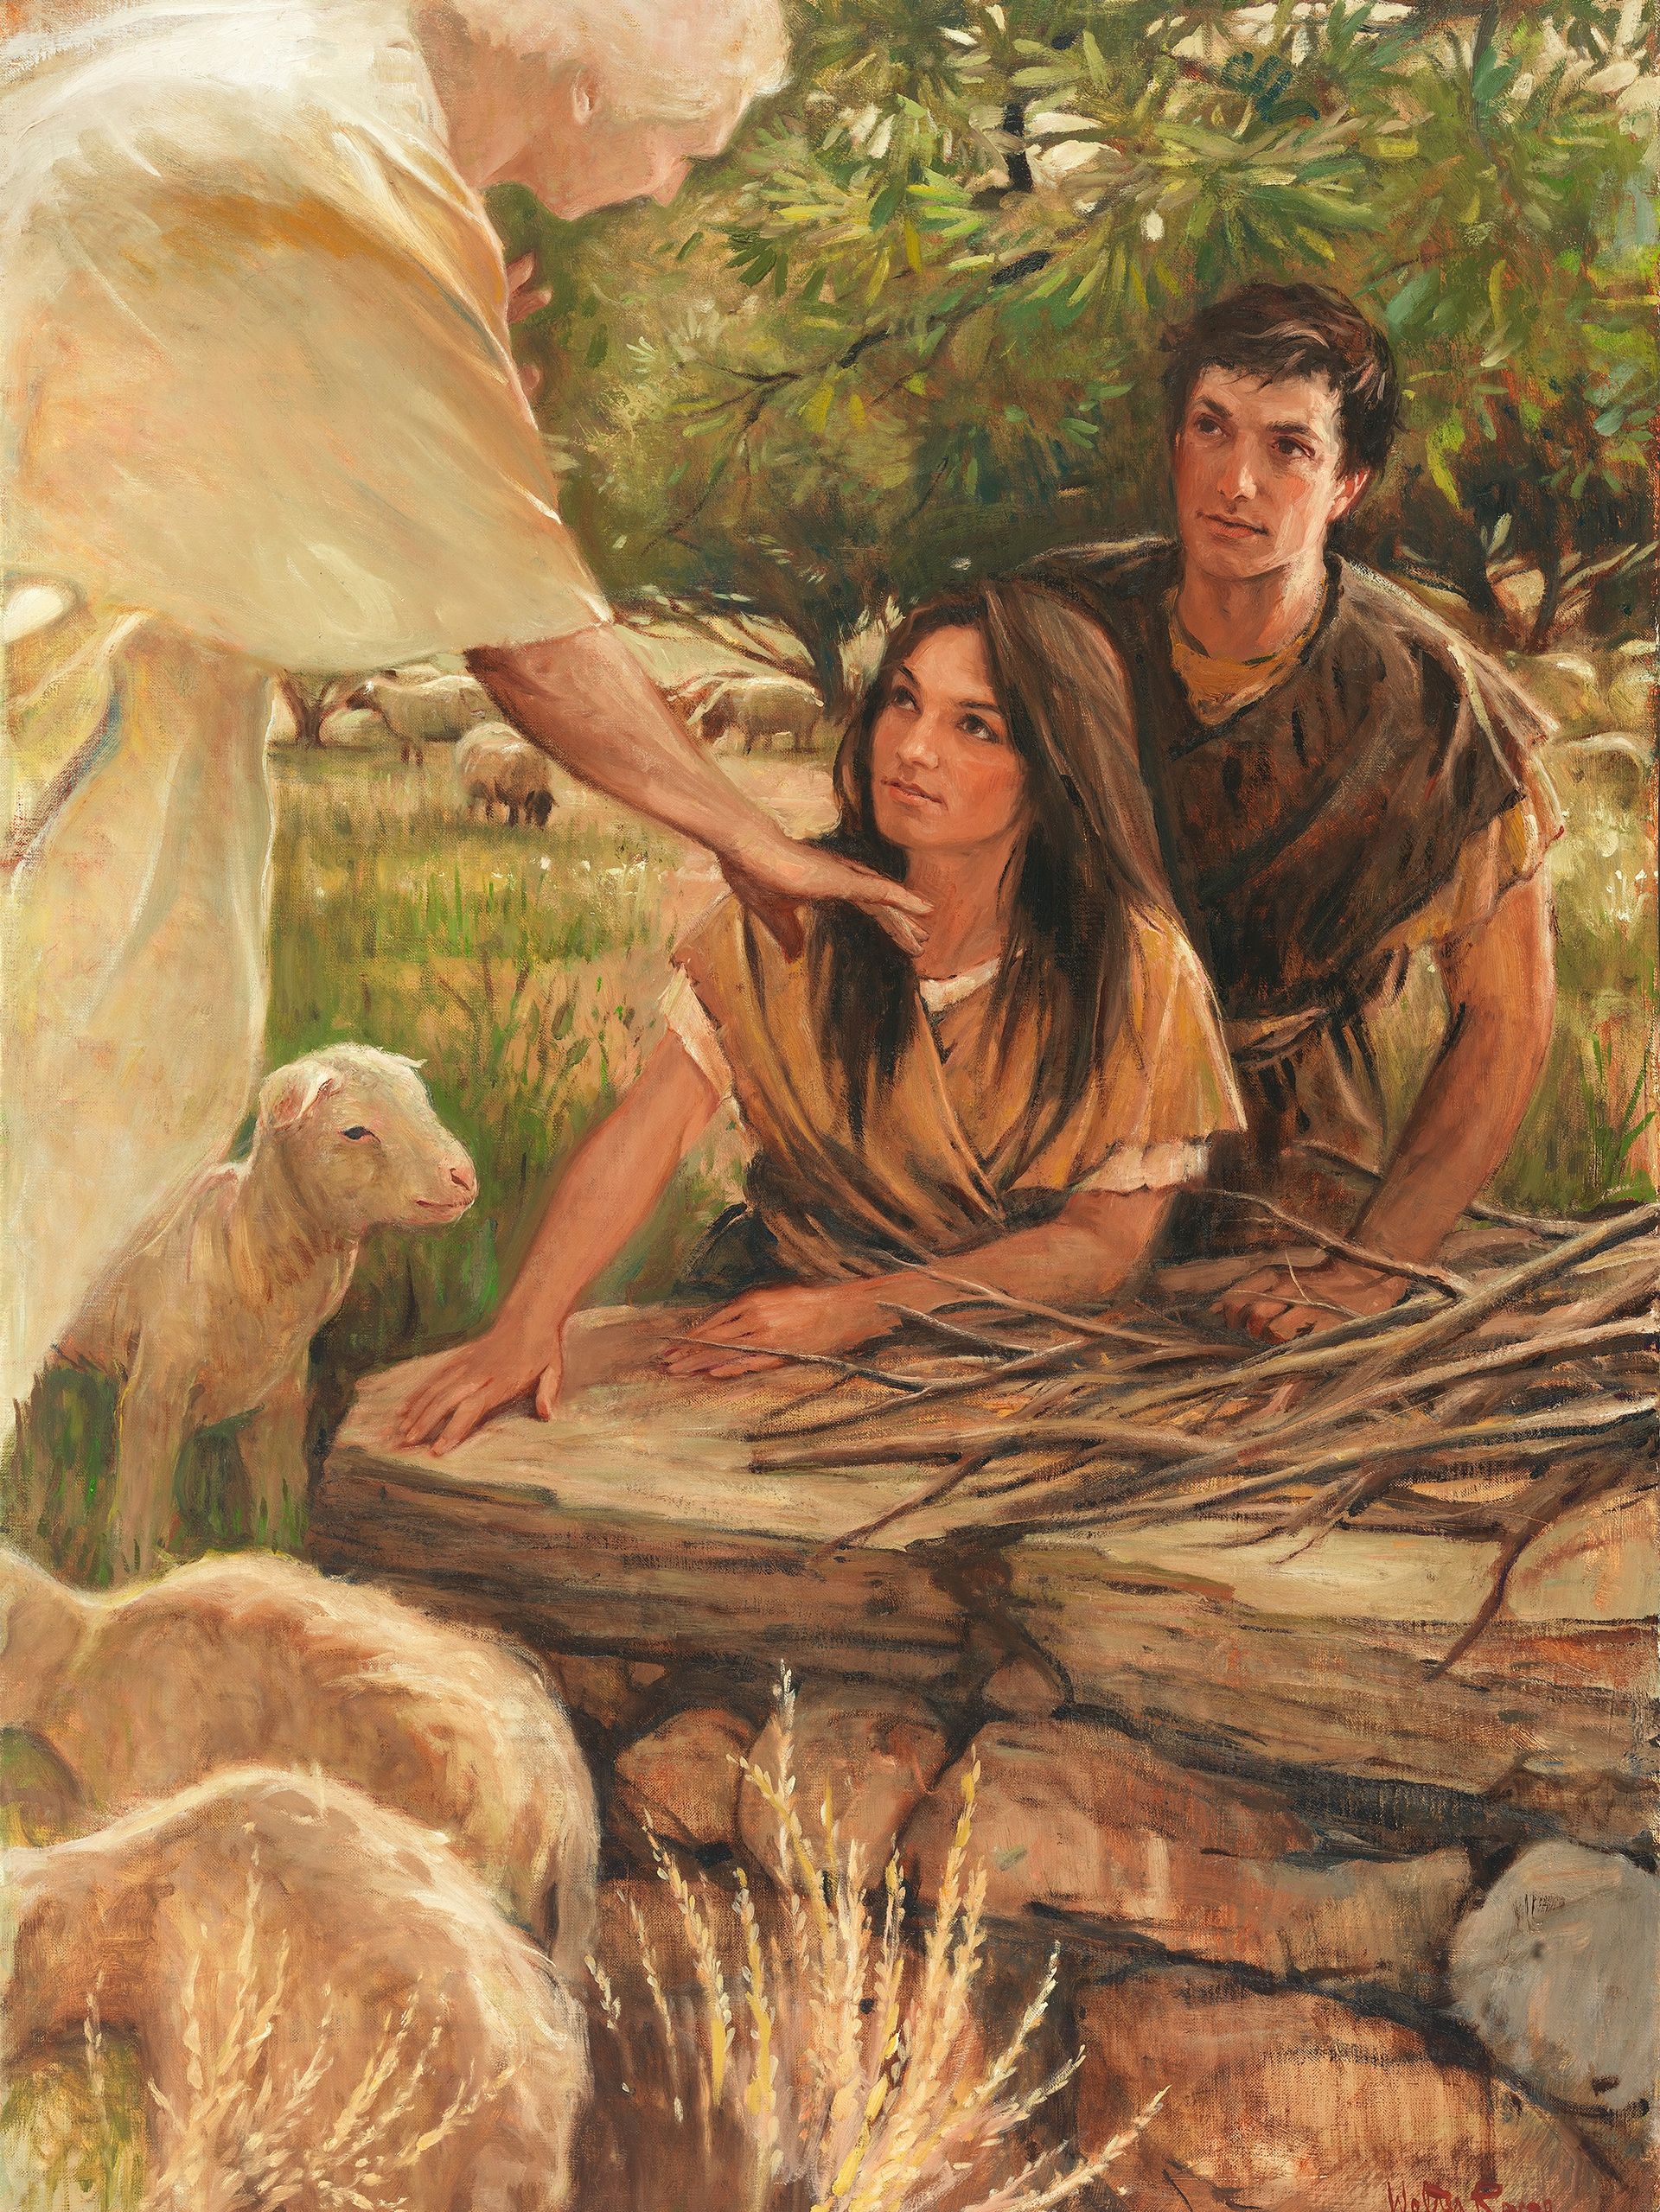 Walter Rane painting of an angel appearing to Adam and Eve as they were making a sacrifice. The angel is instructing Adam and Eve as they kneel at an altar. A sacrificial lamb stands close by, and other sheep are in the painting.